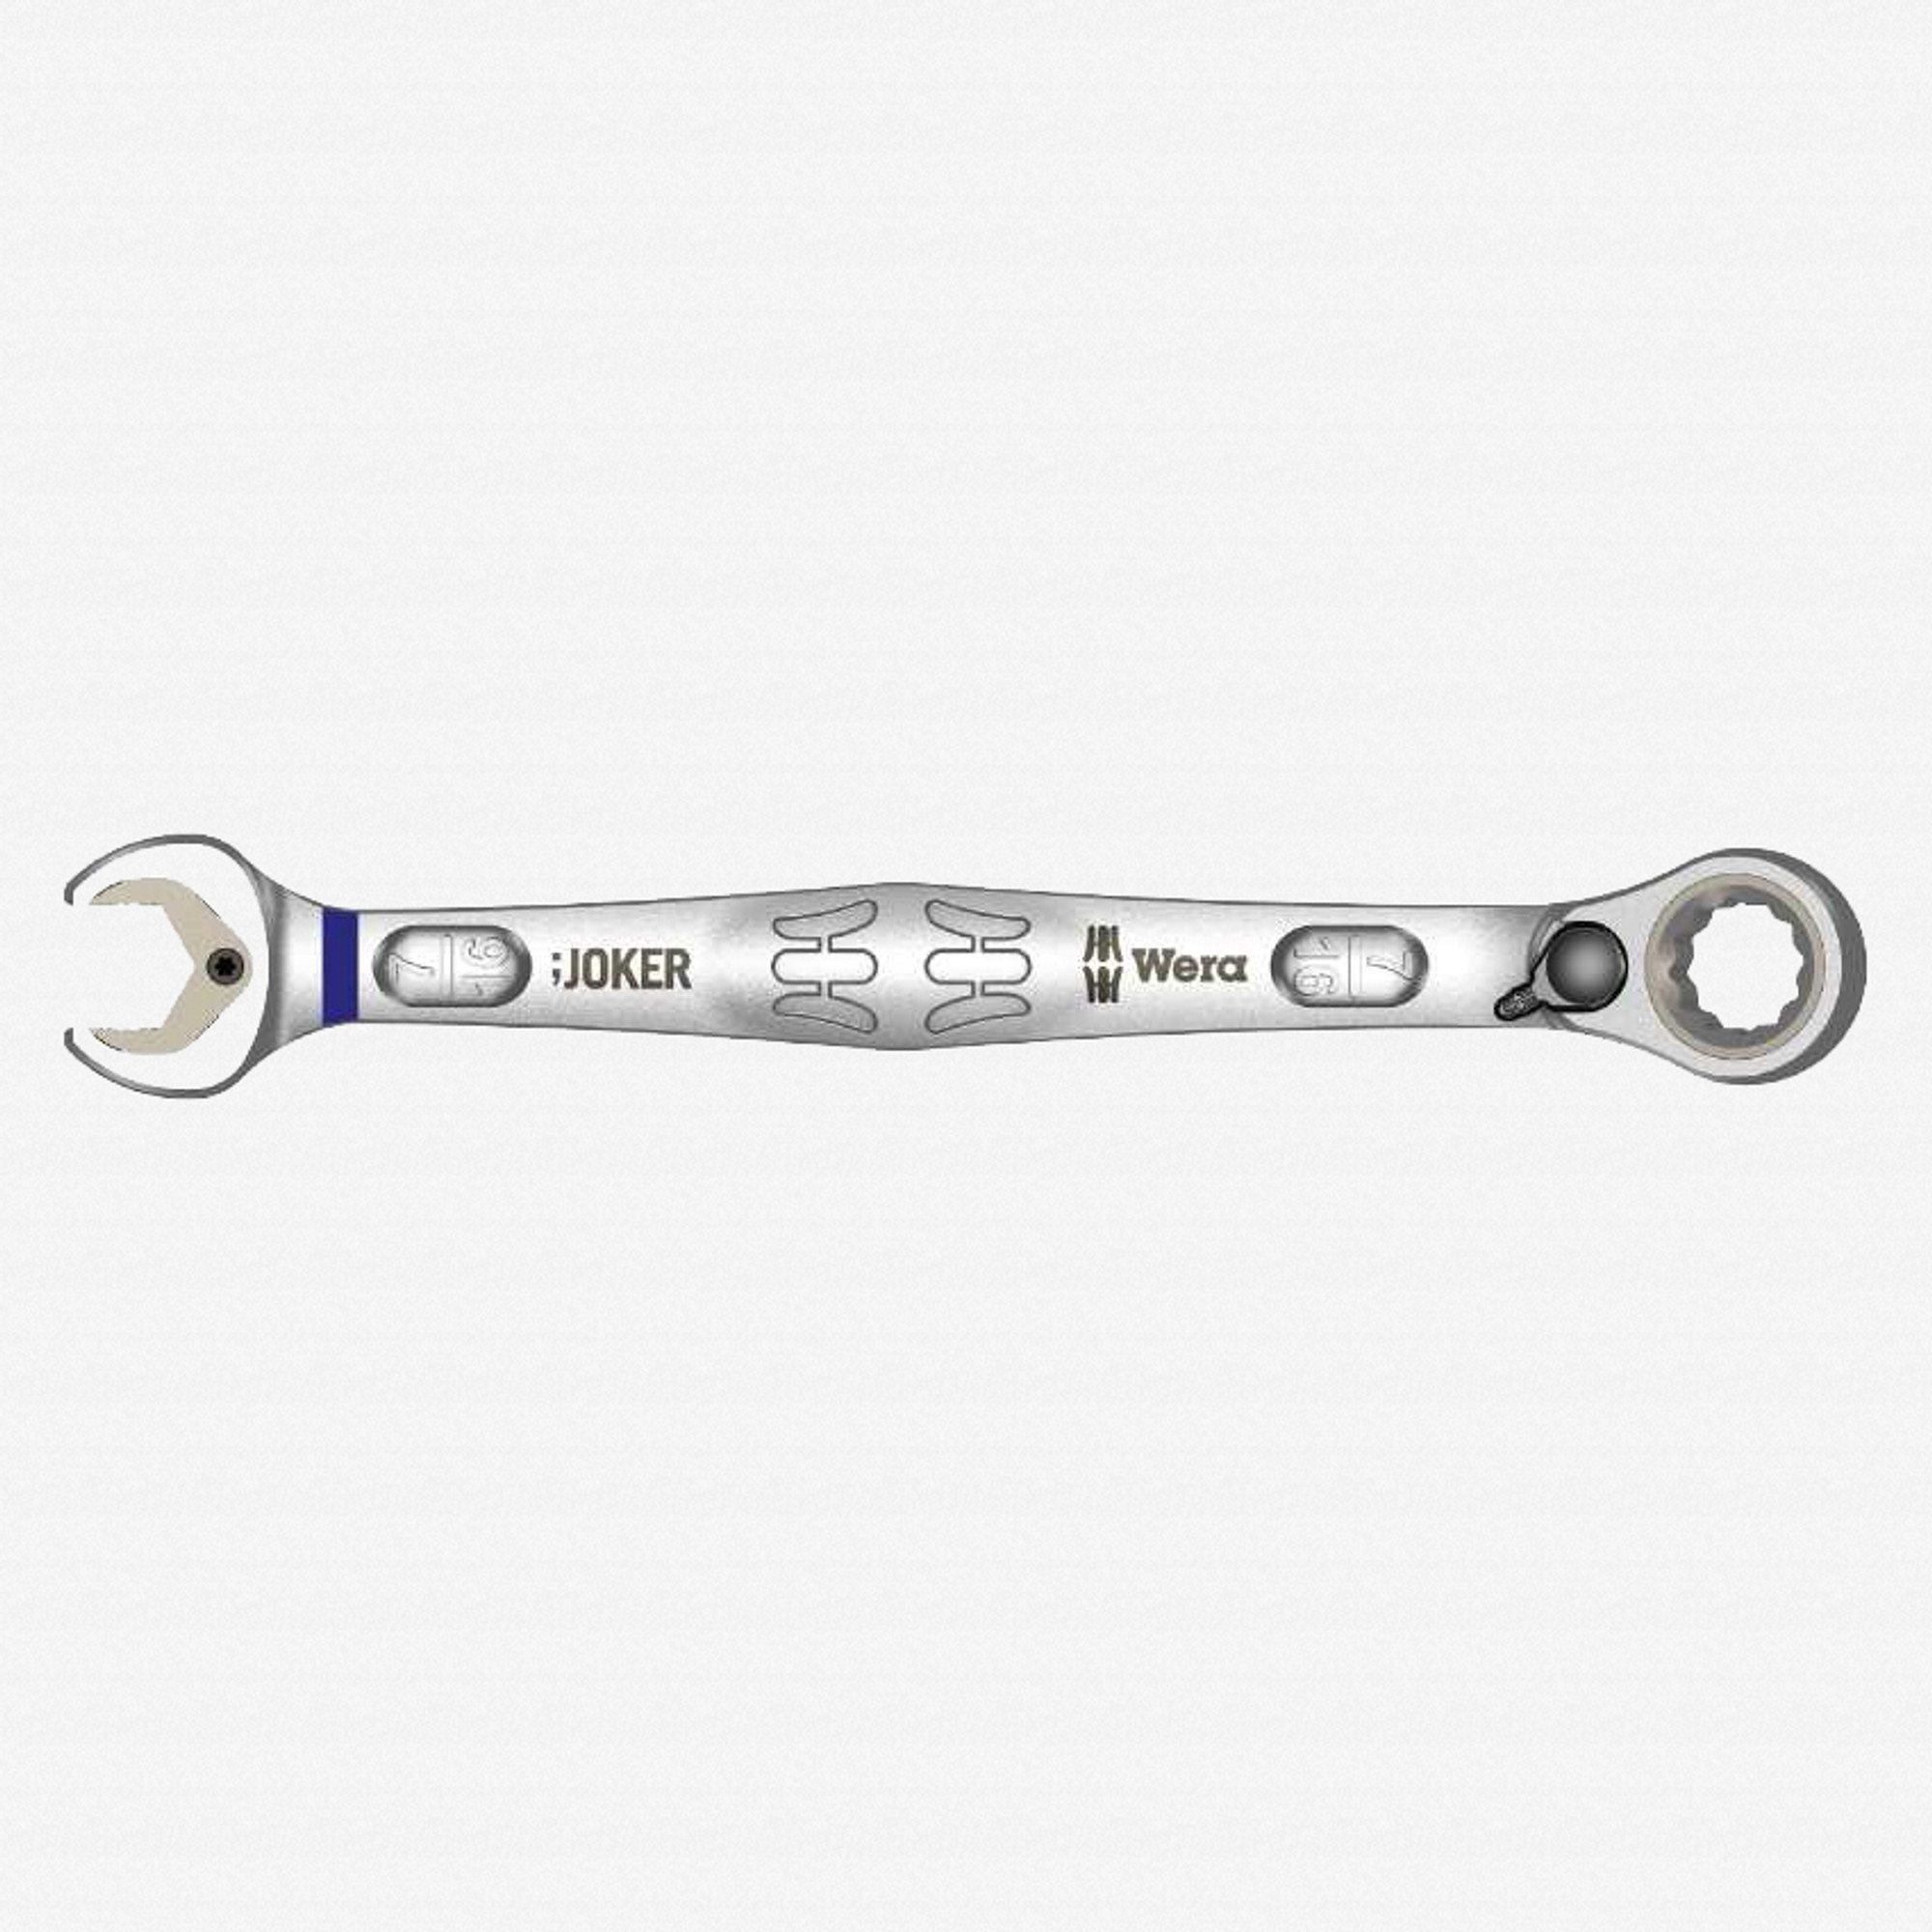 Wera Tools 020077 Joker Combination Wrench with Switch - 7/16